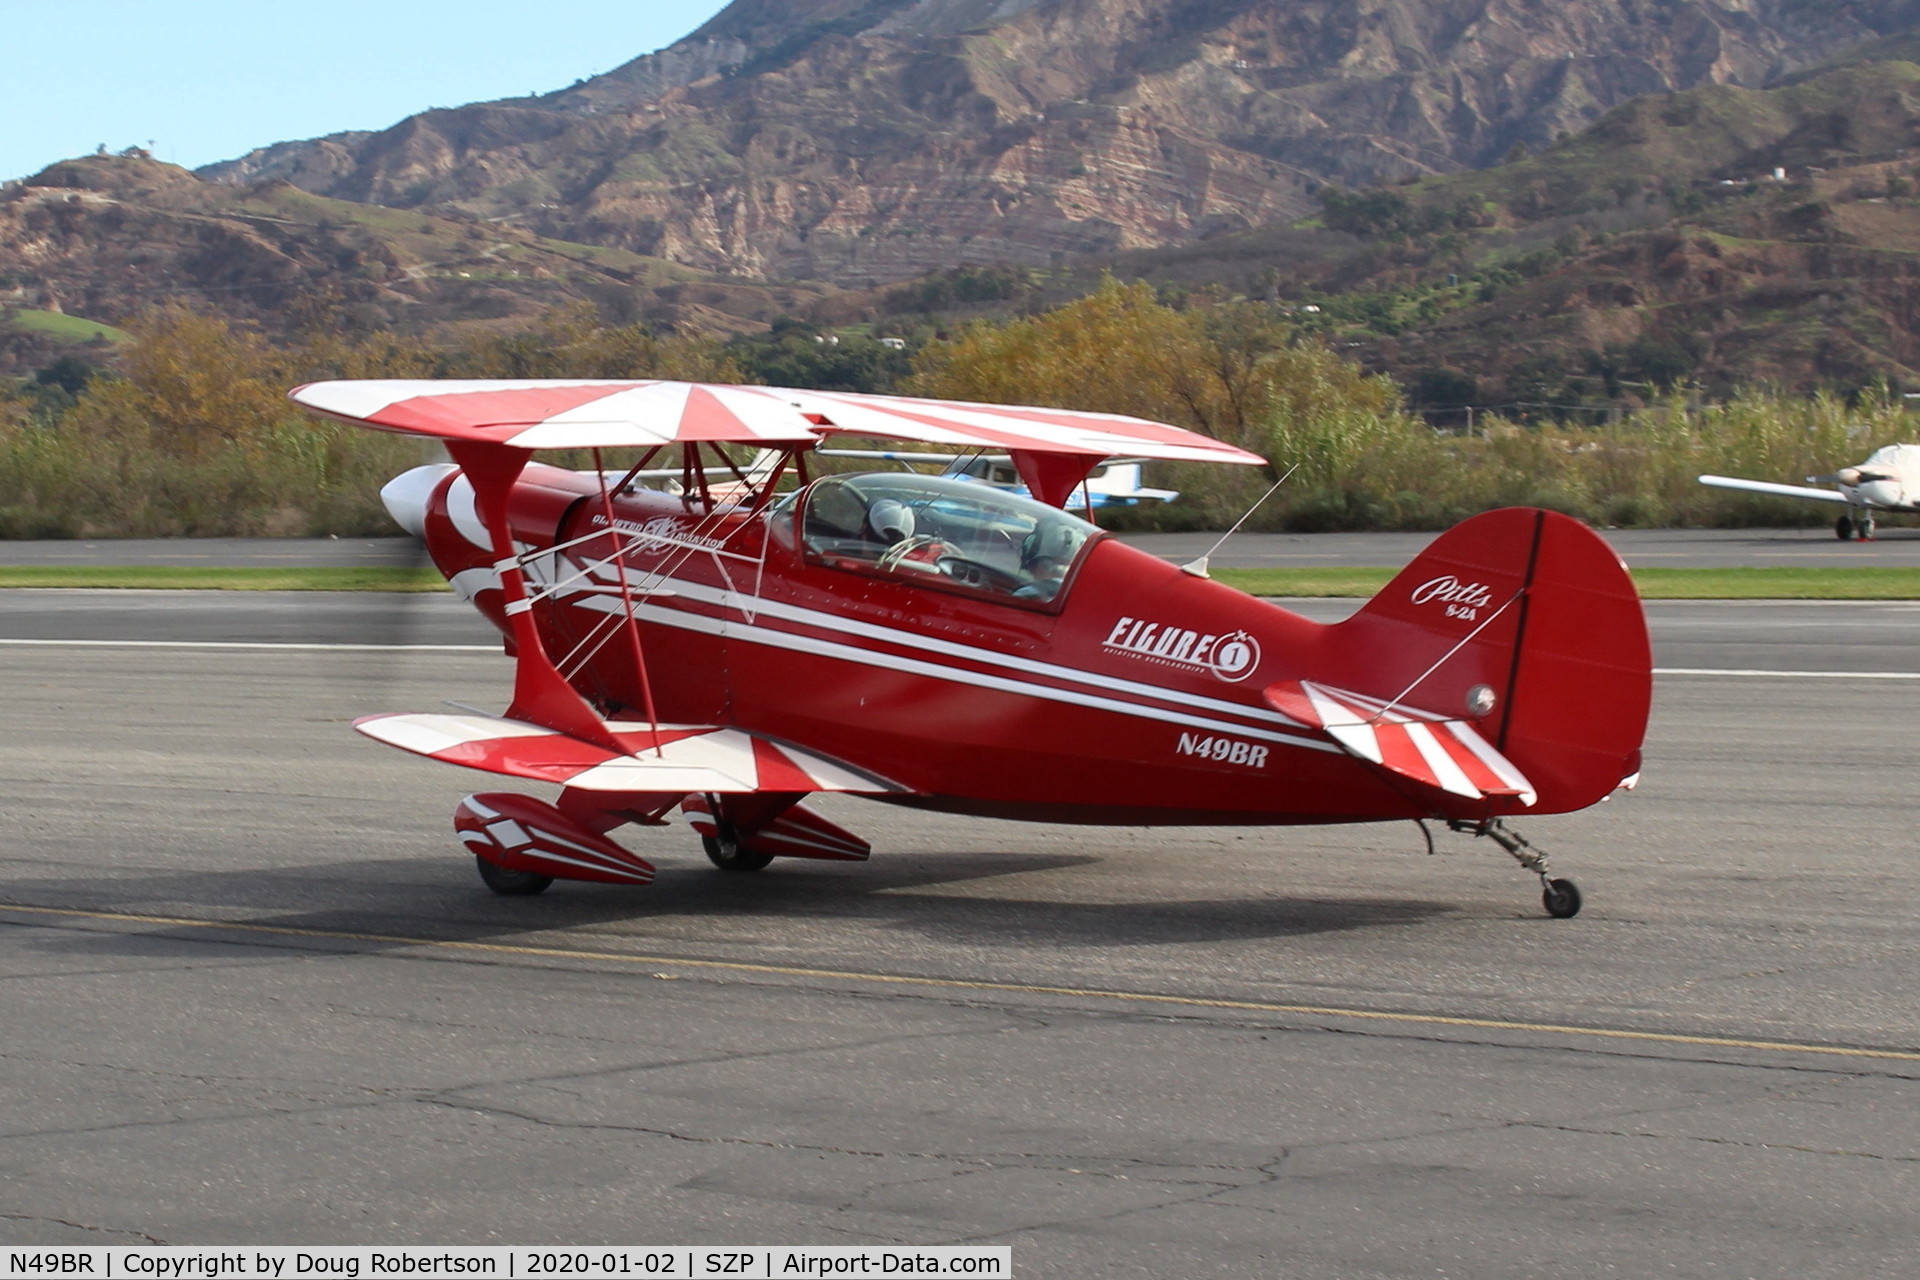 N49BR, Pitts S-2A Special C/N 2212, 1983 Aerotek PITTS S-2A SPECIAL, Lycoming AEIO-360 180 Hp, a production biplane, taxi